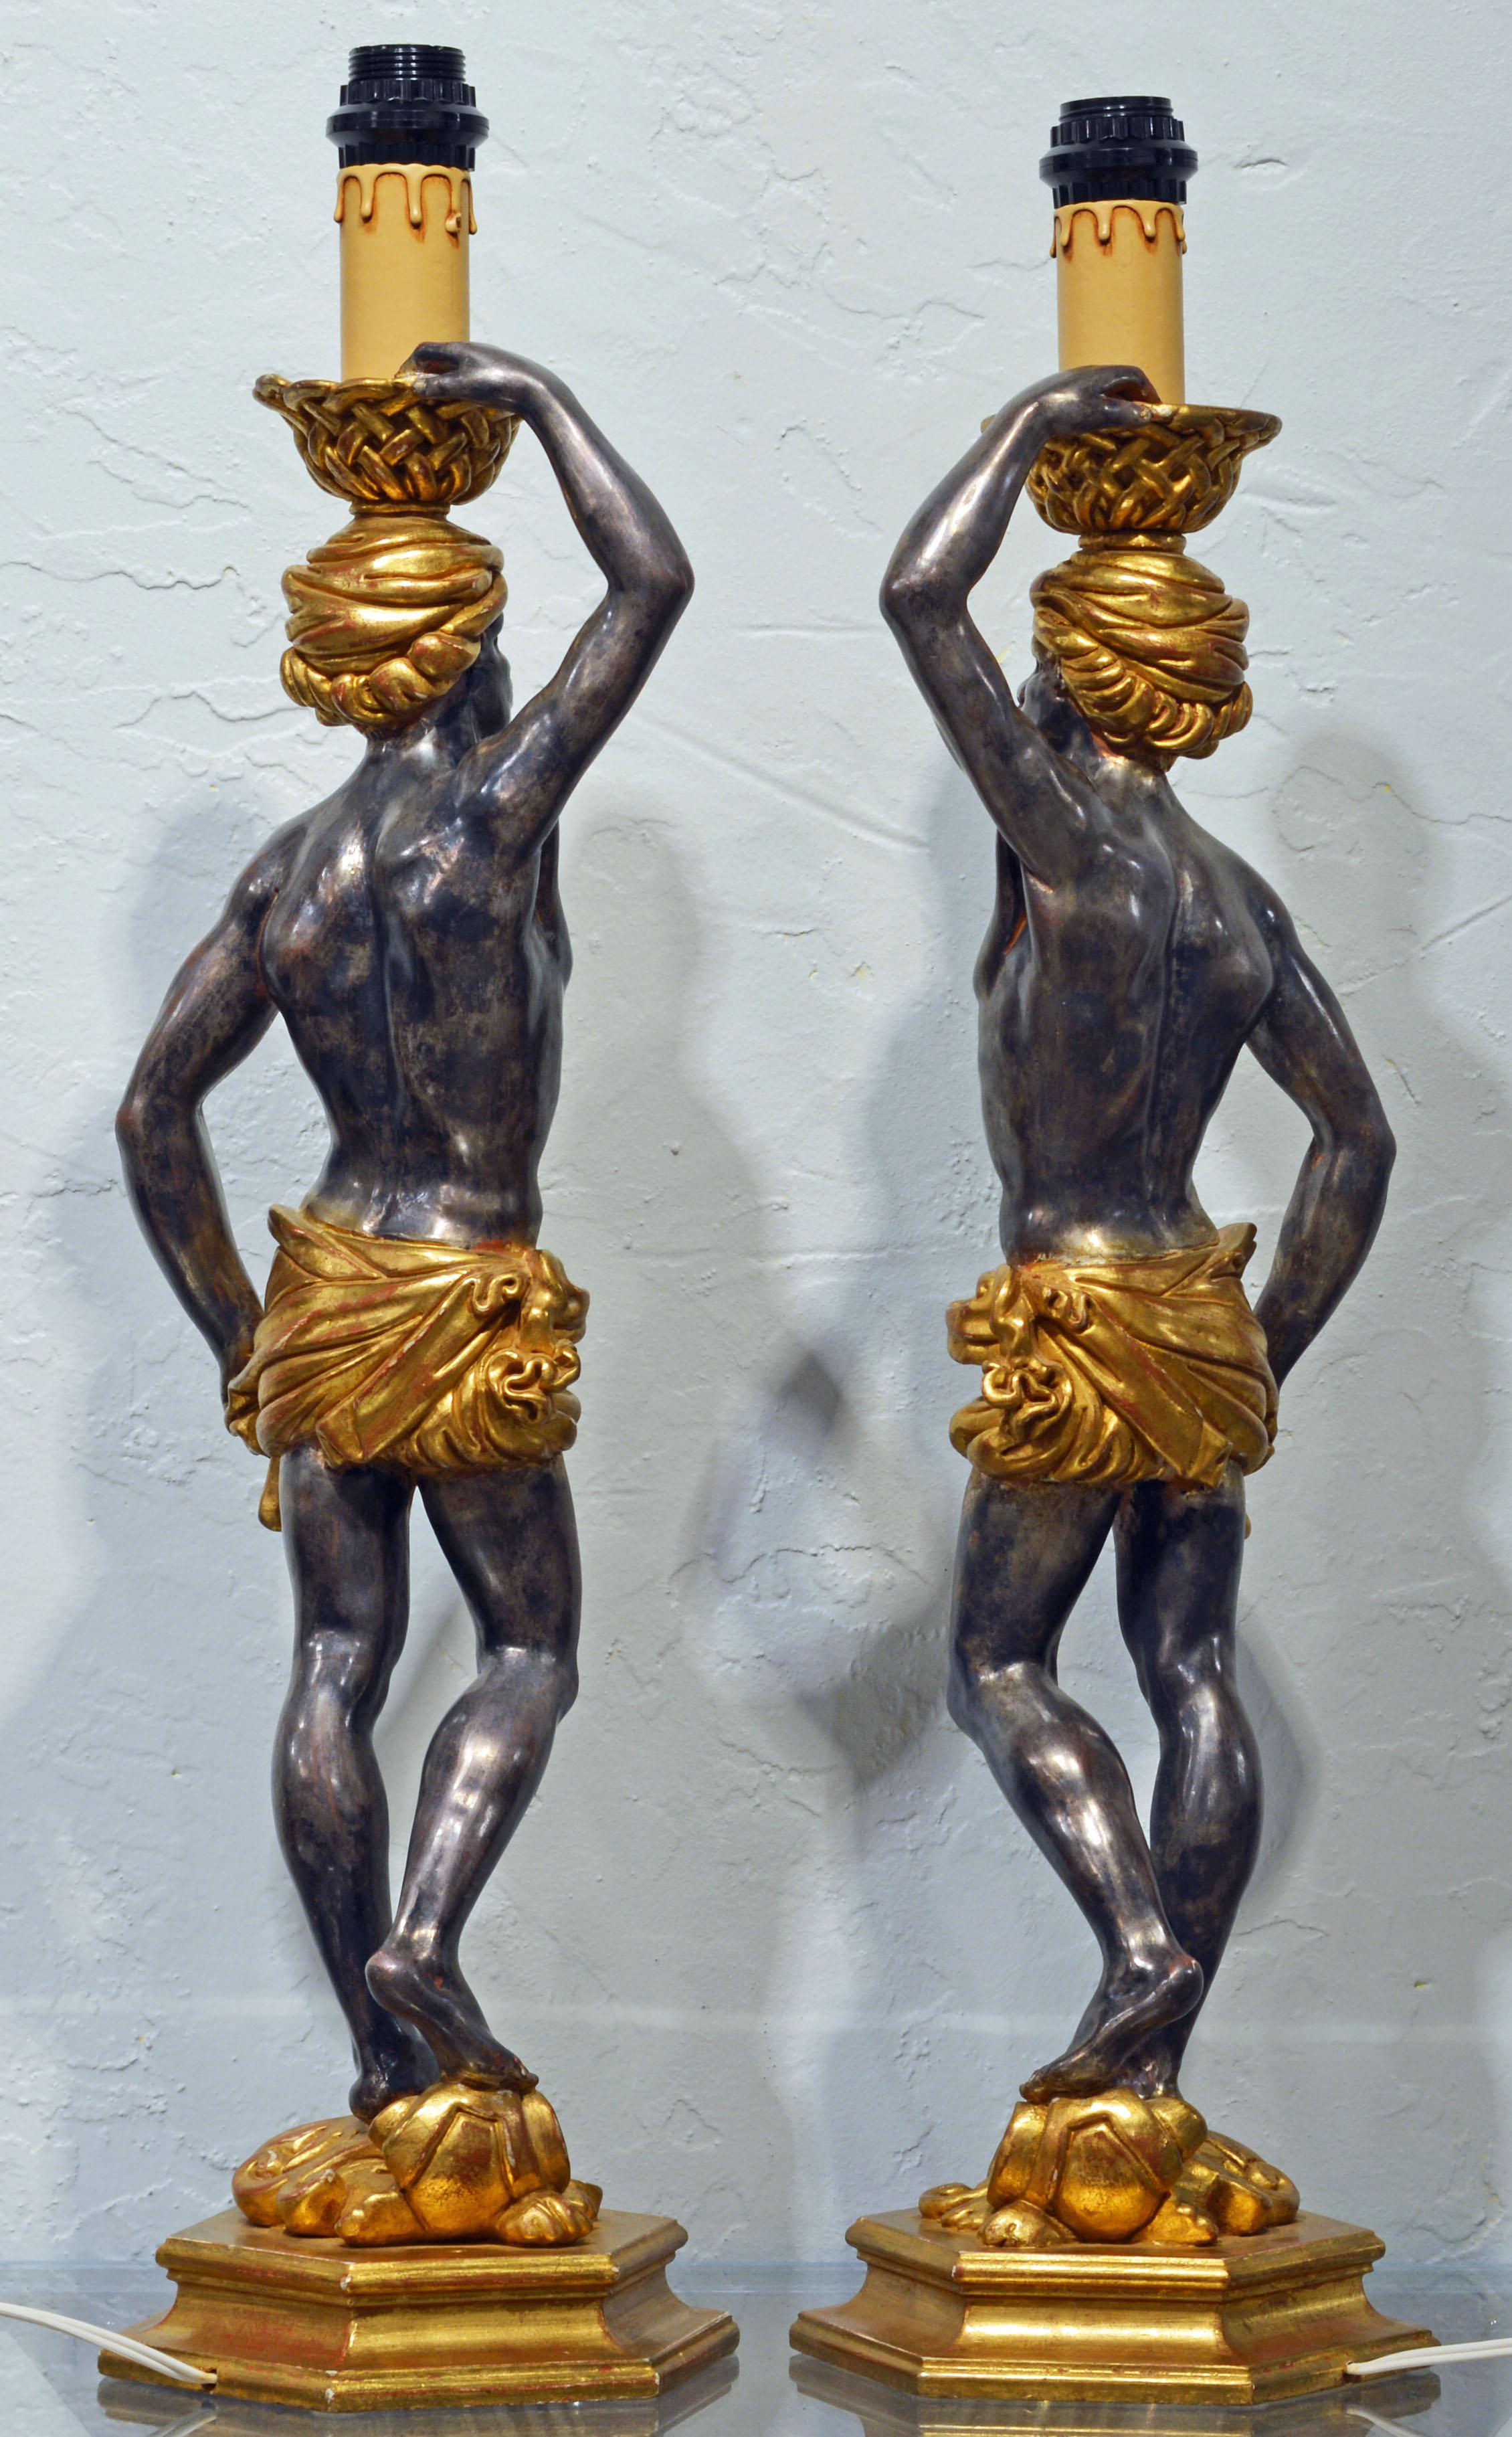 Baroque Pair of Carved Midcentury Italian Table Lamps in the Form of Male Orientals